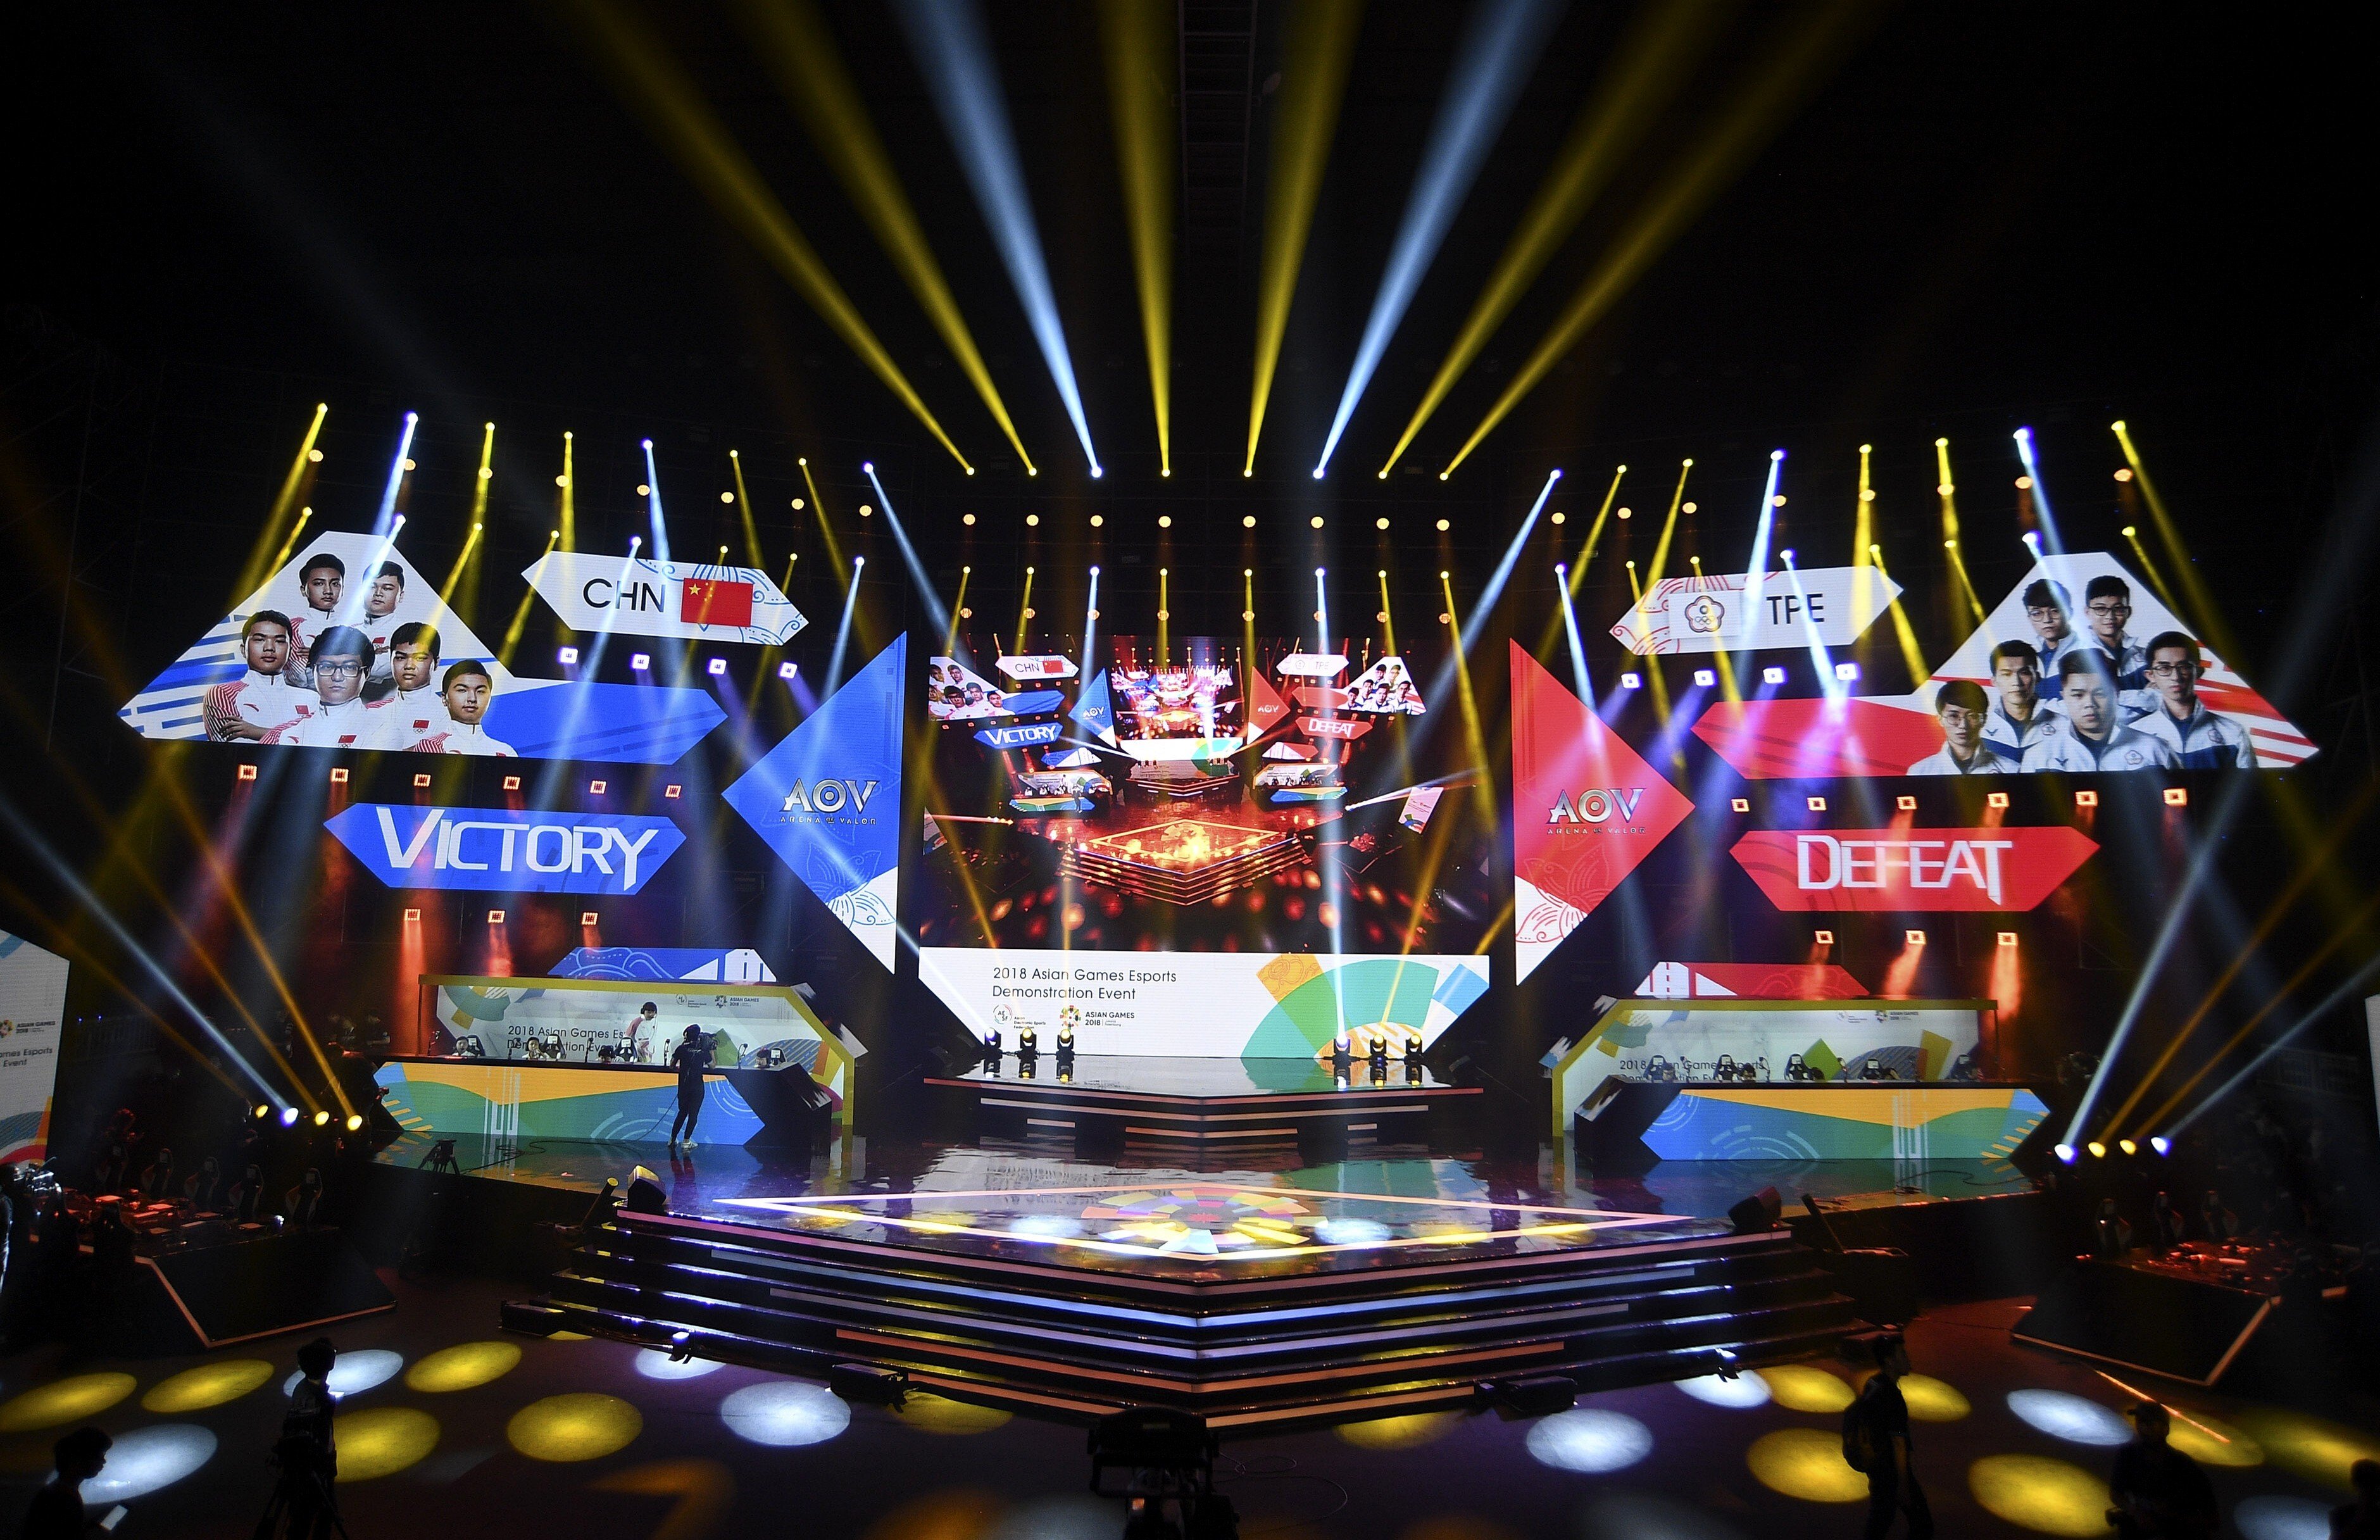 The China eSports team play Taiwan in the eSports exhibition at the 18th Asian Games in August 2018. Photo: AP